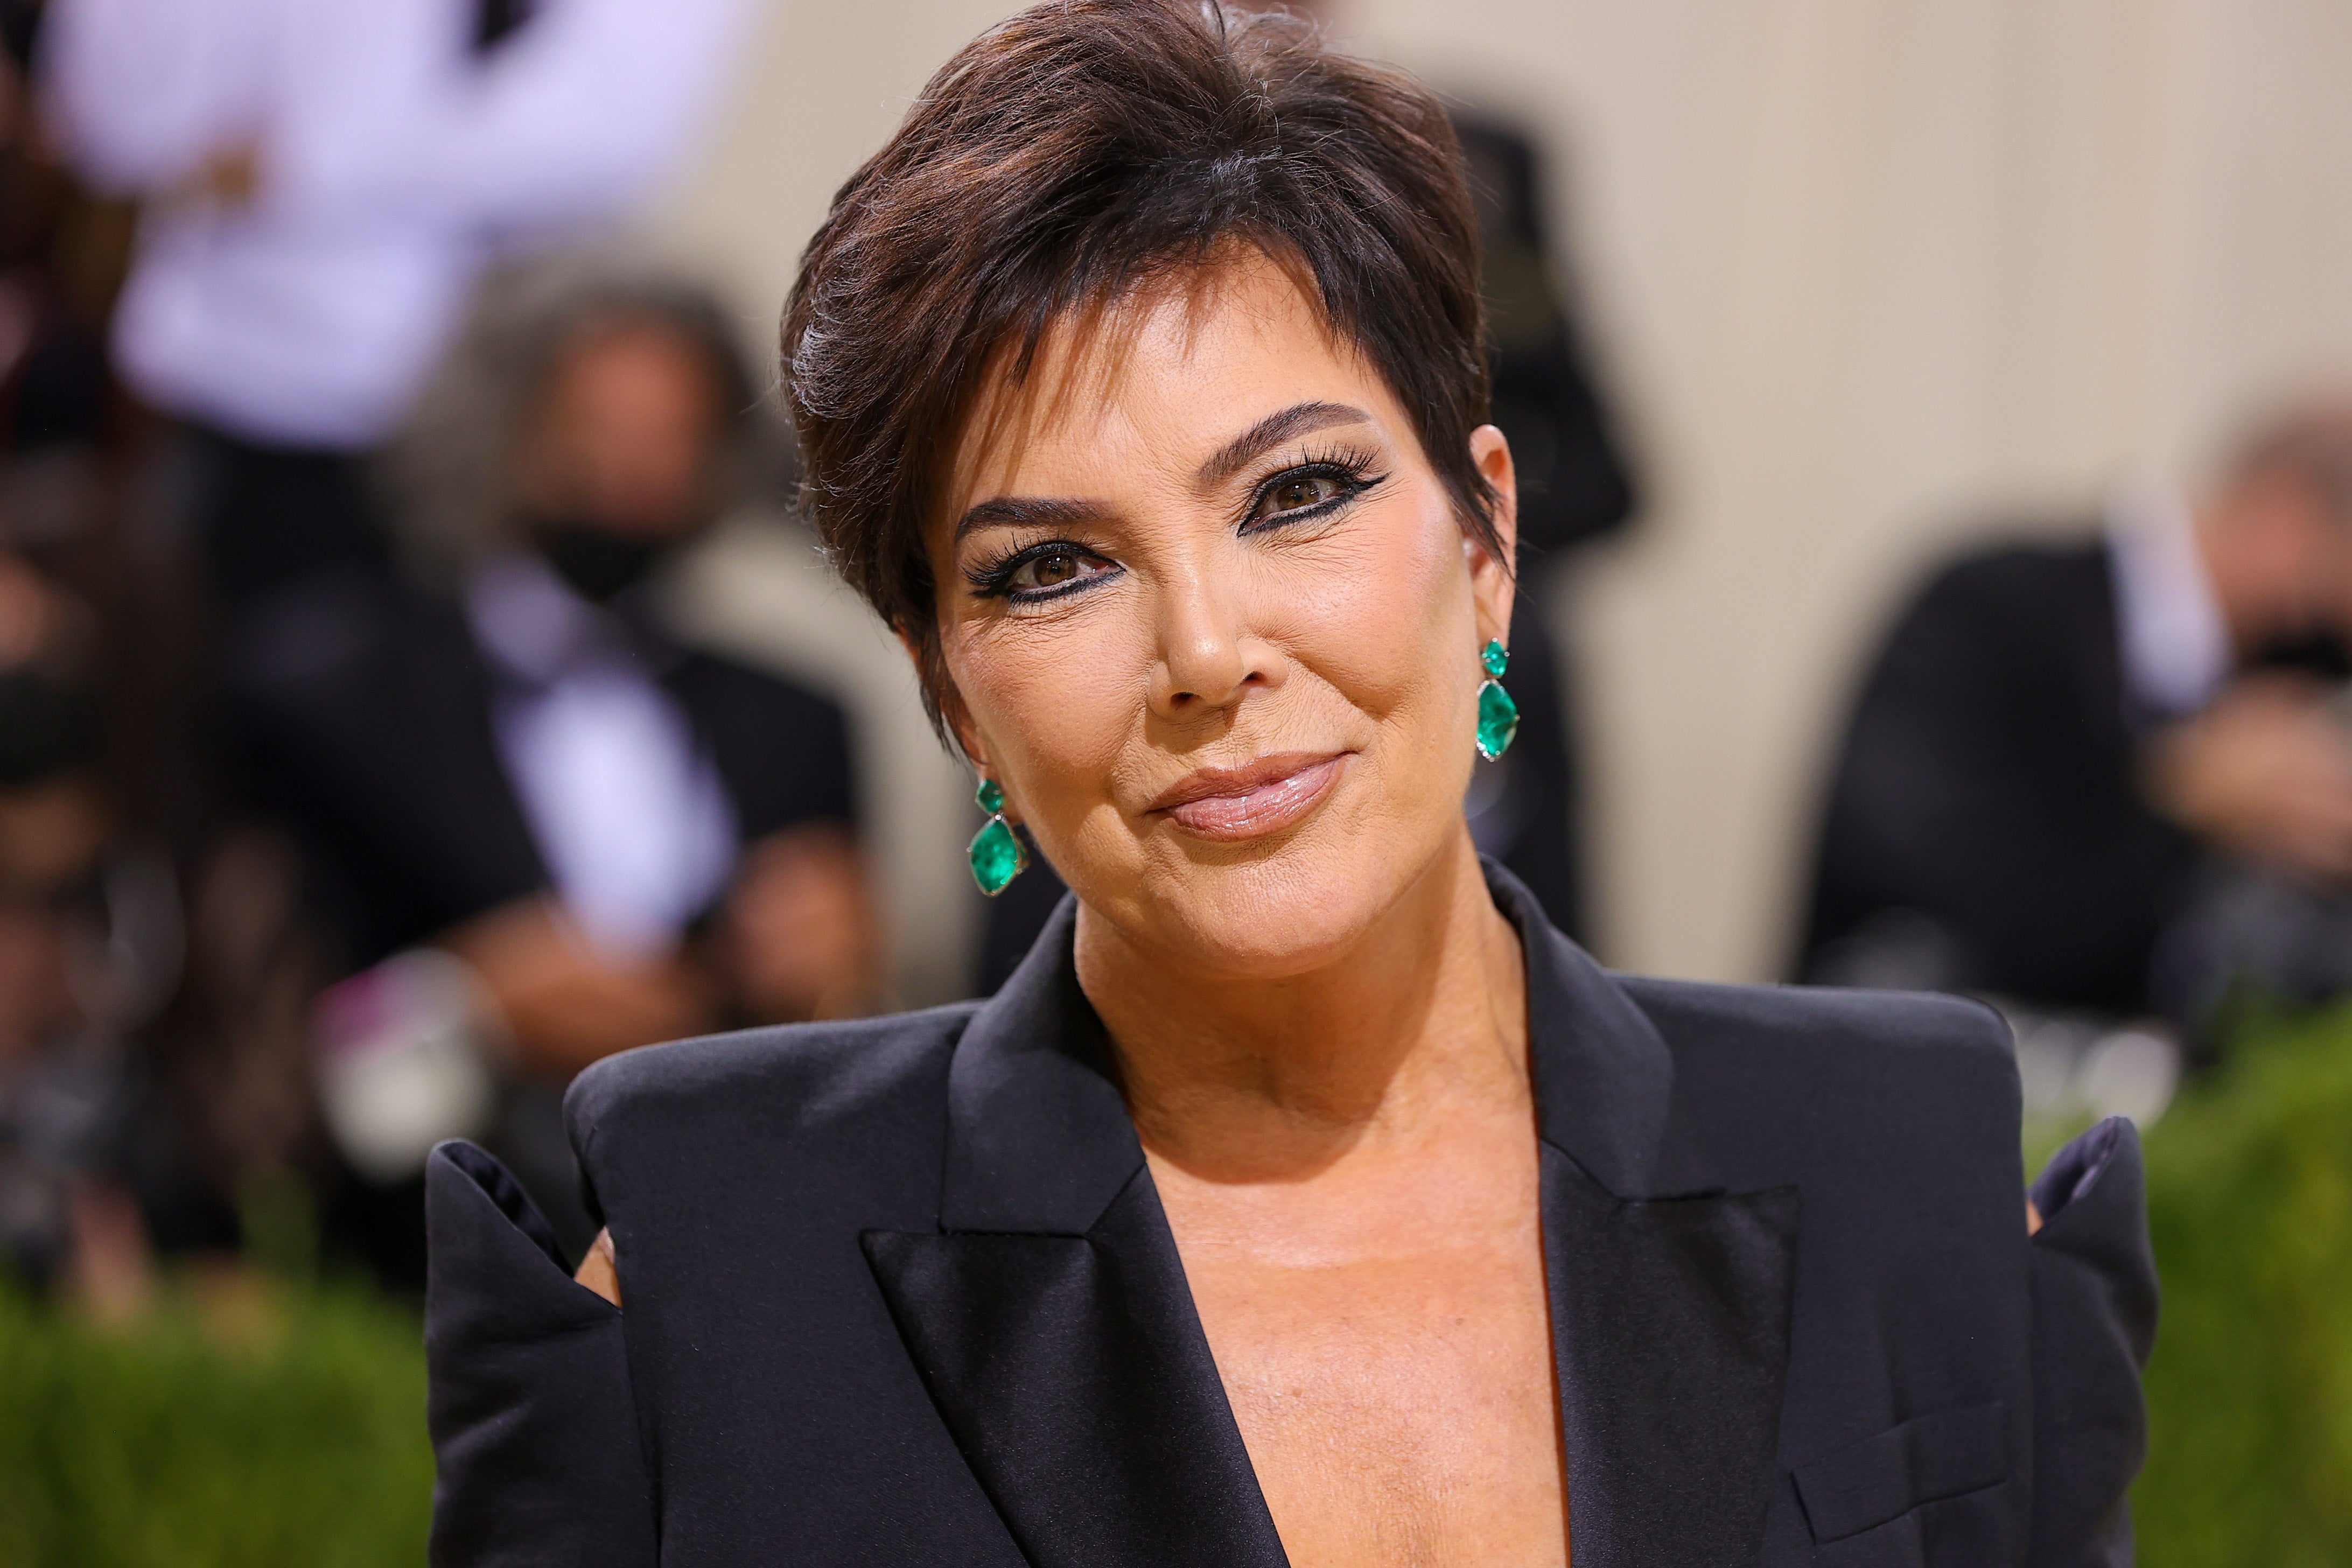 Kris Jenner is the matriarch of the family